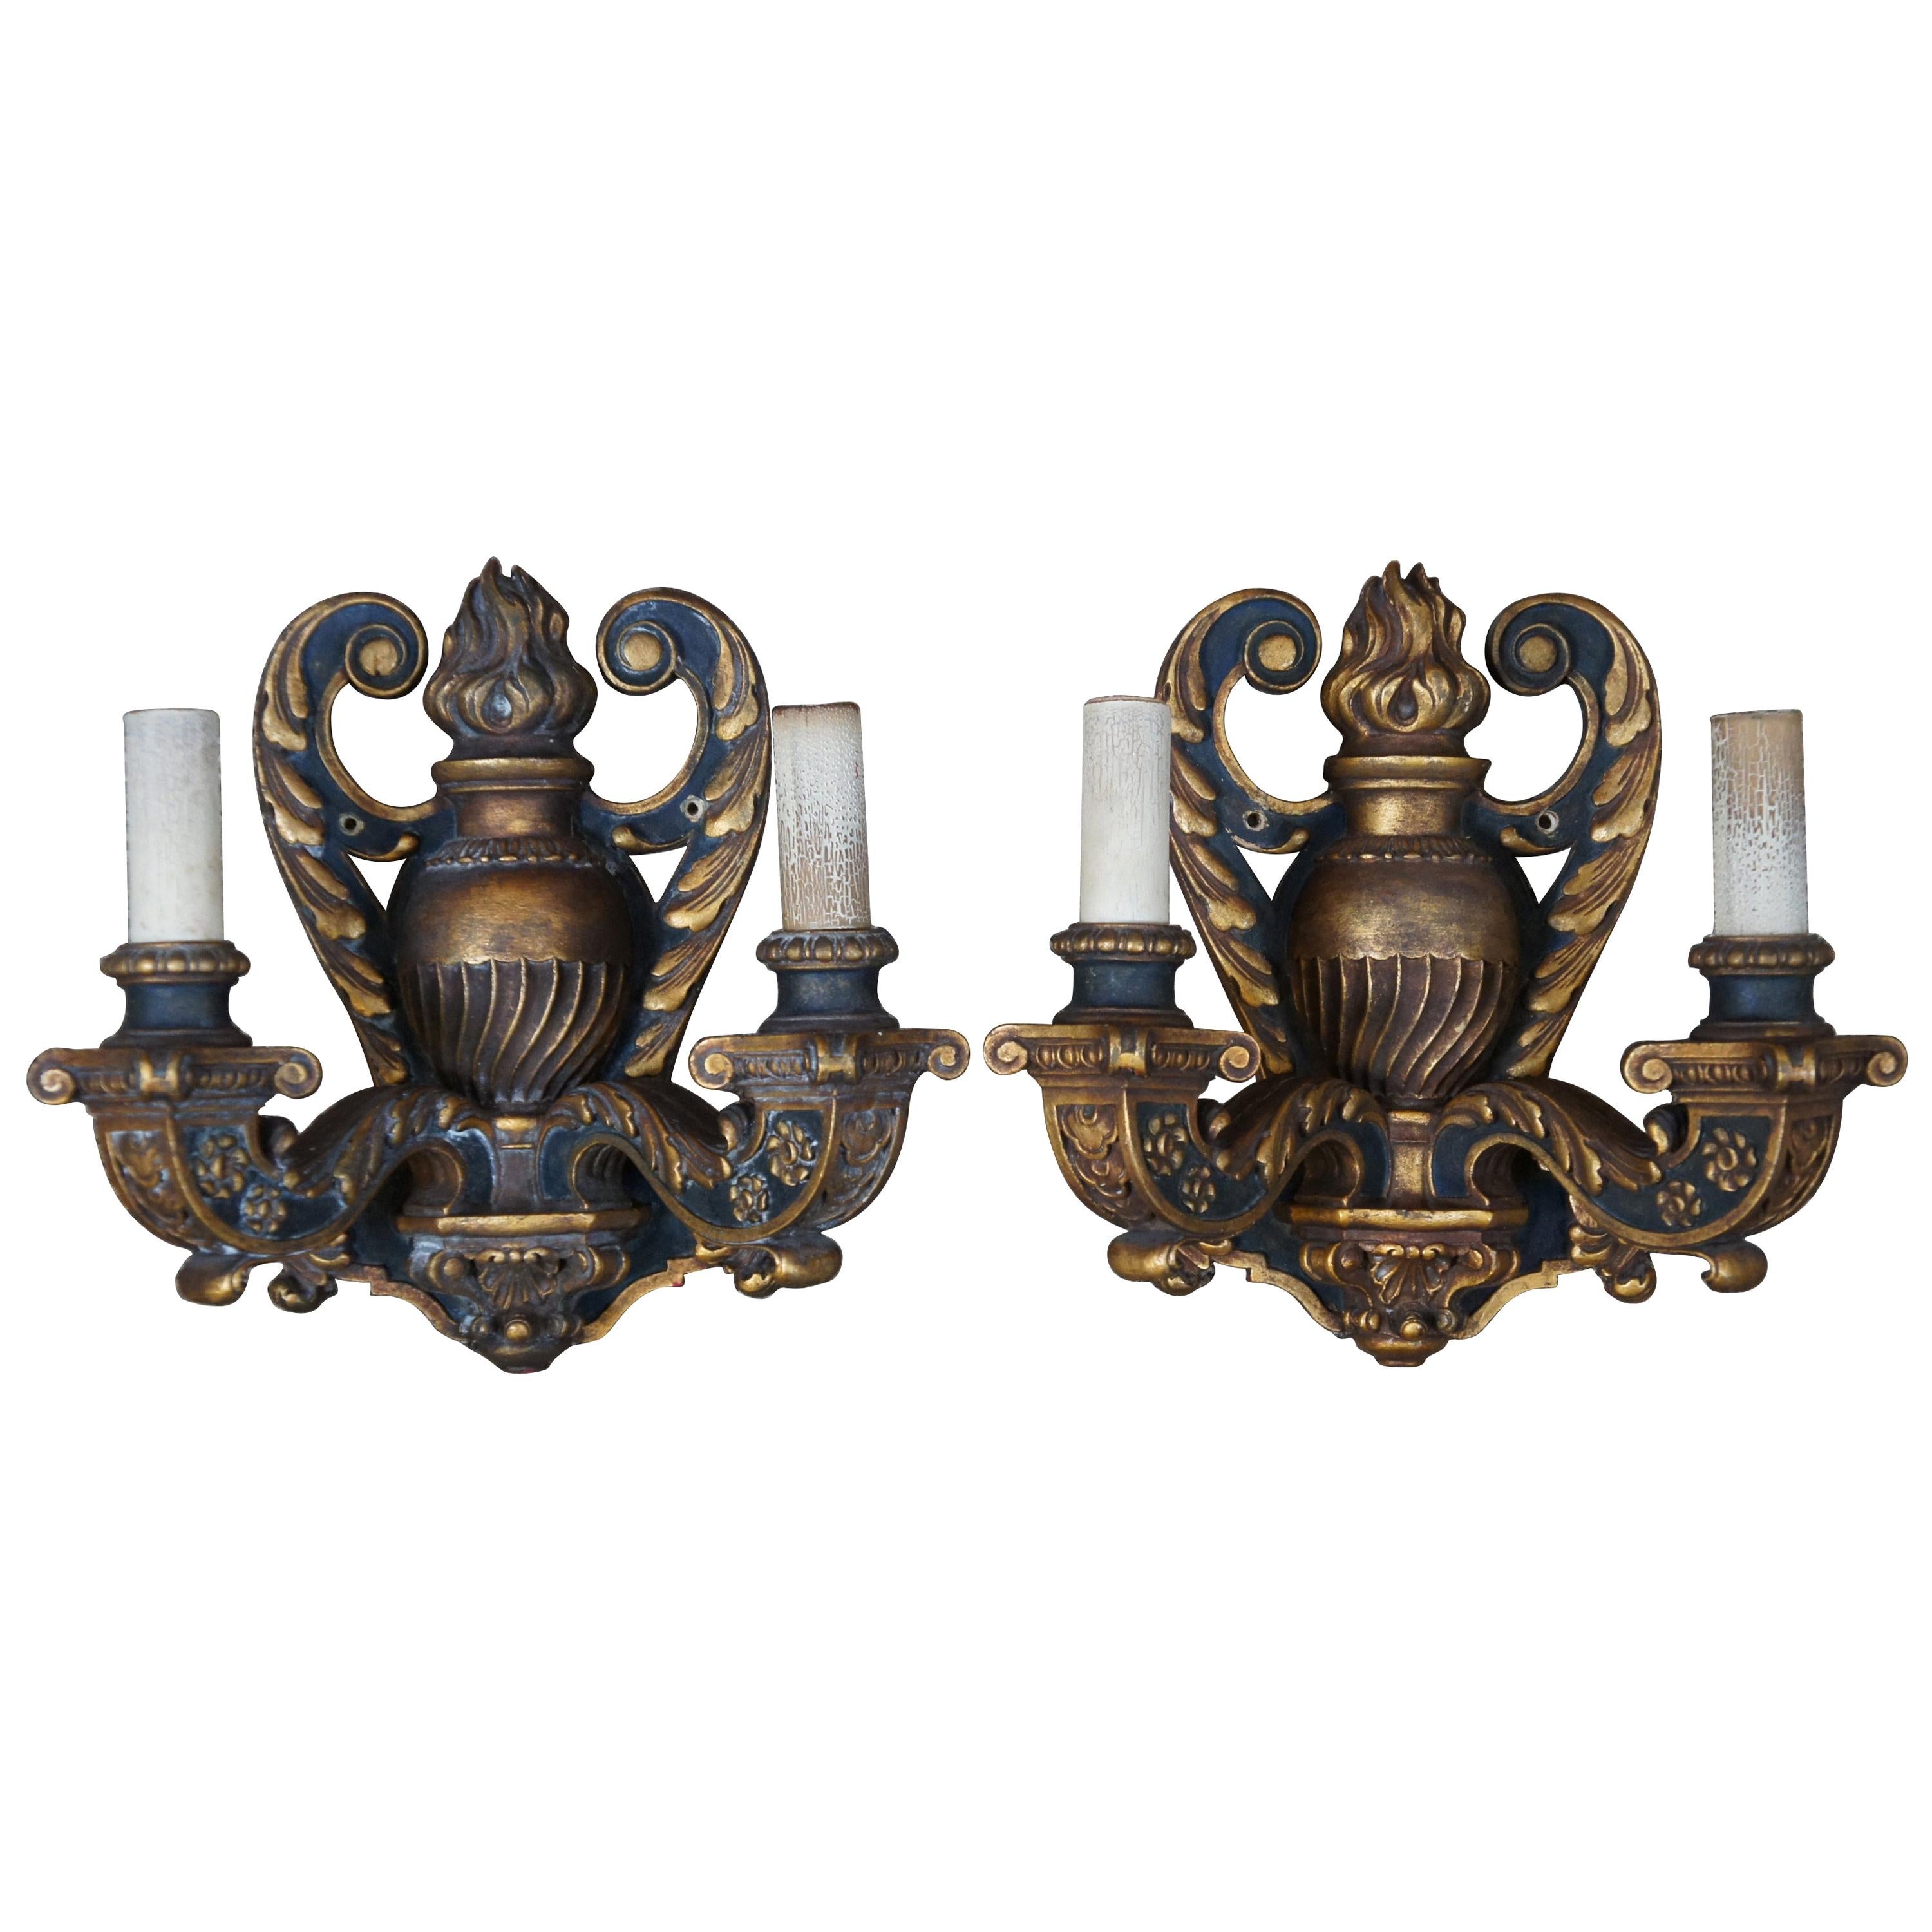 2 Antique Baroque Revival Neoclassical Carved Two Light Candelabra Wall Sconces